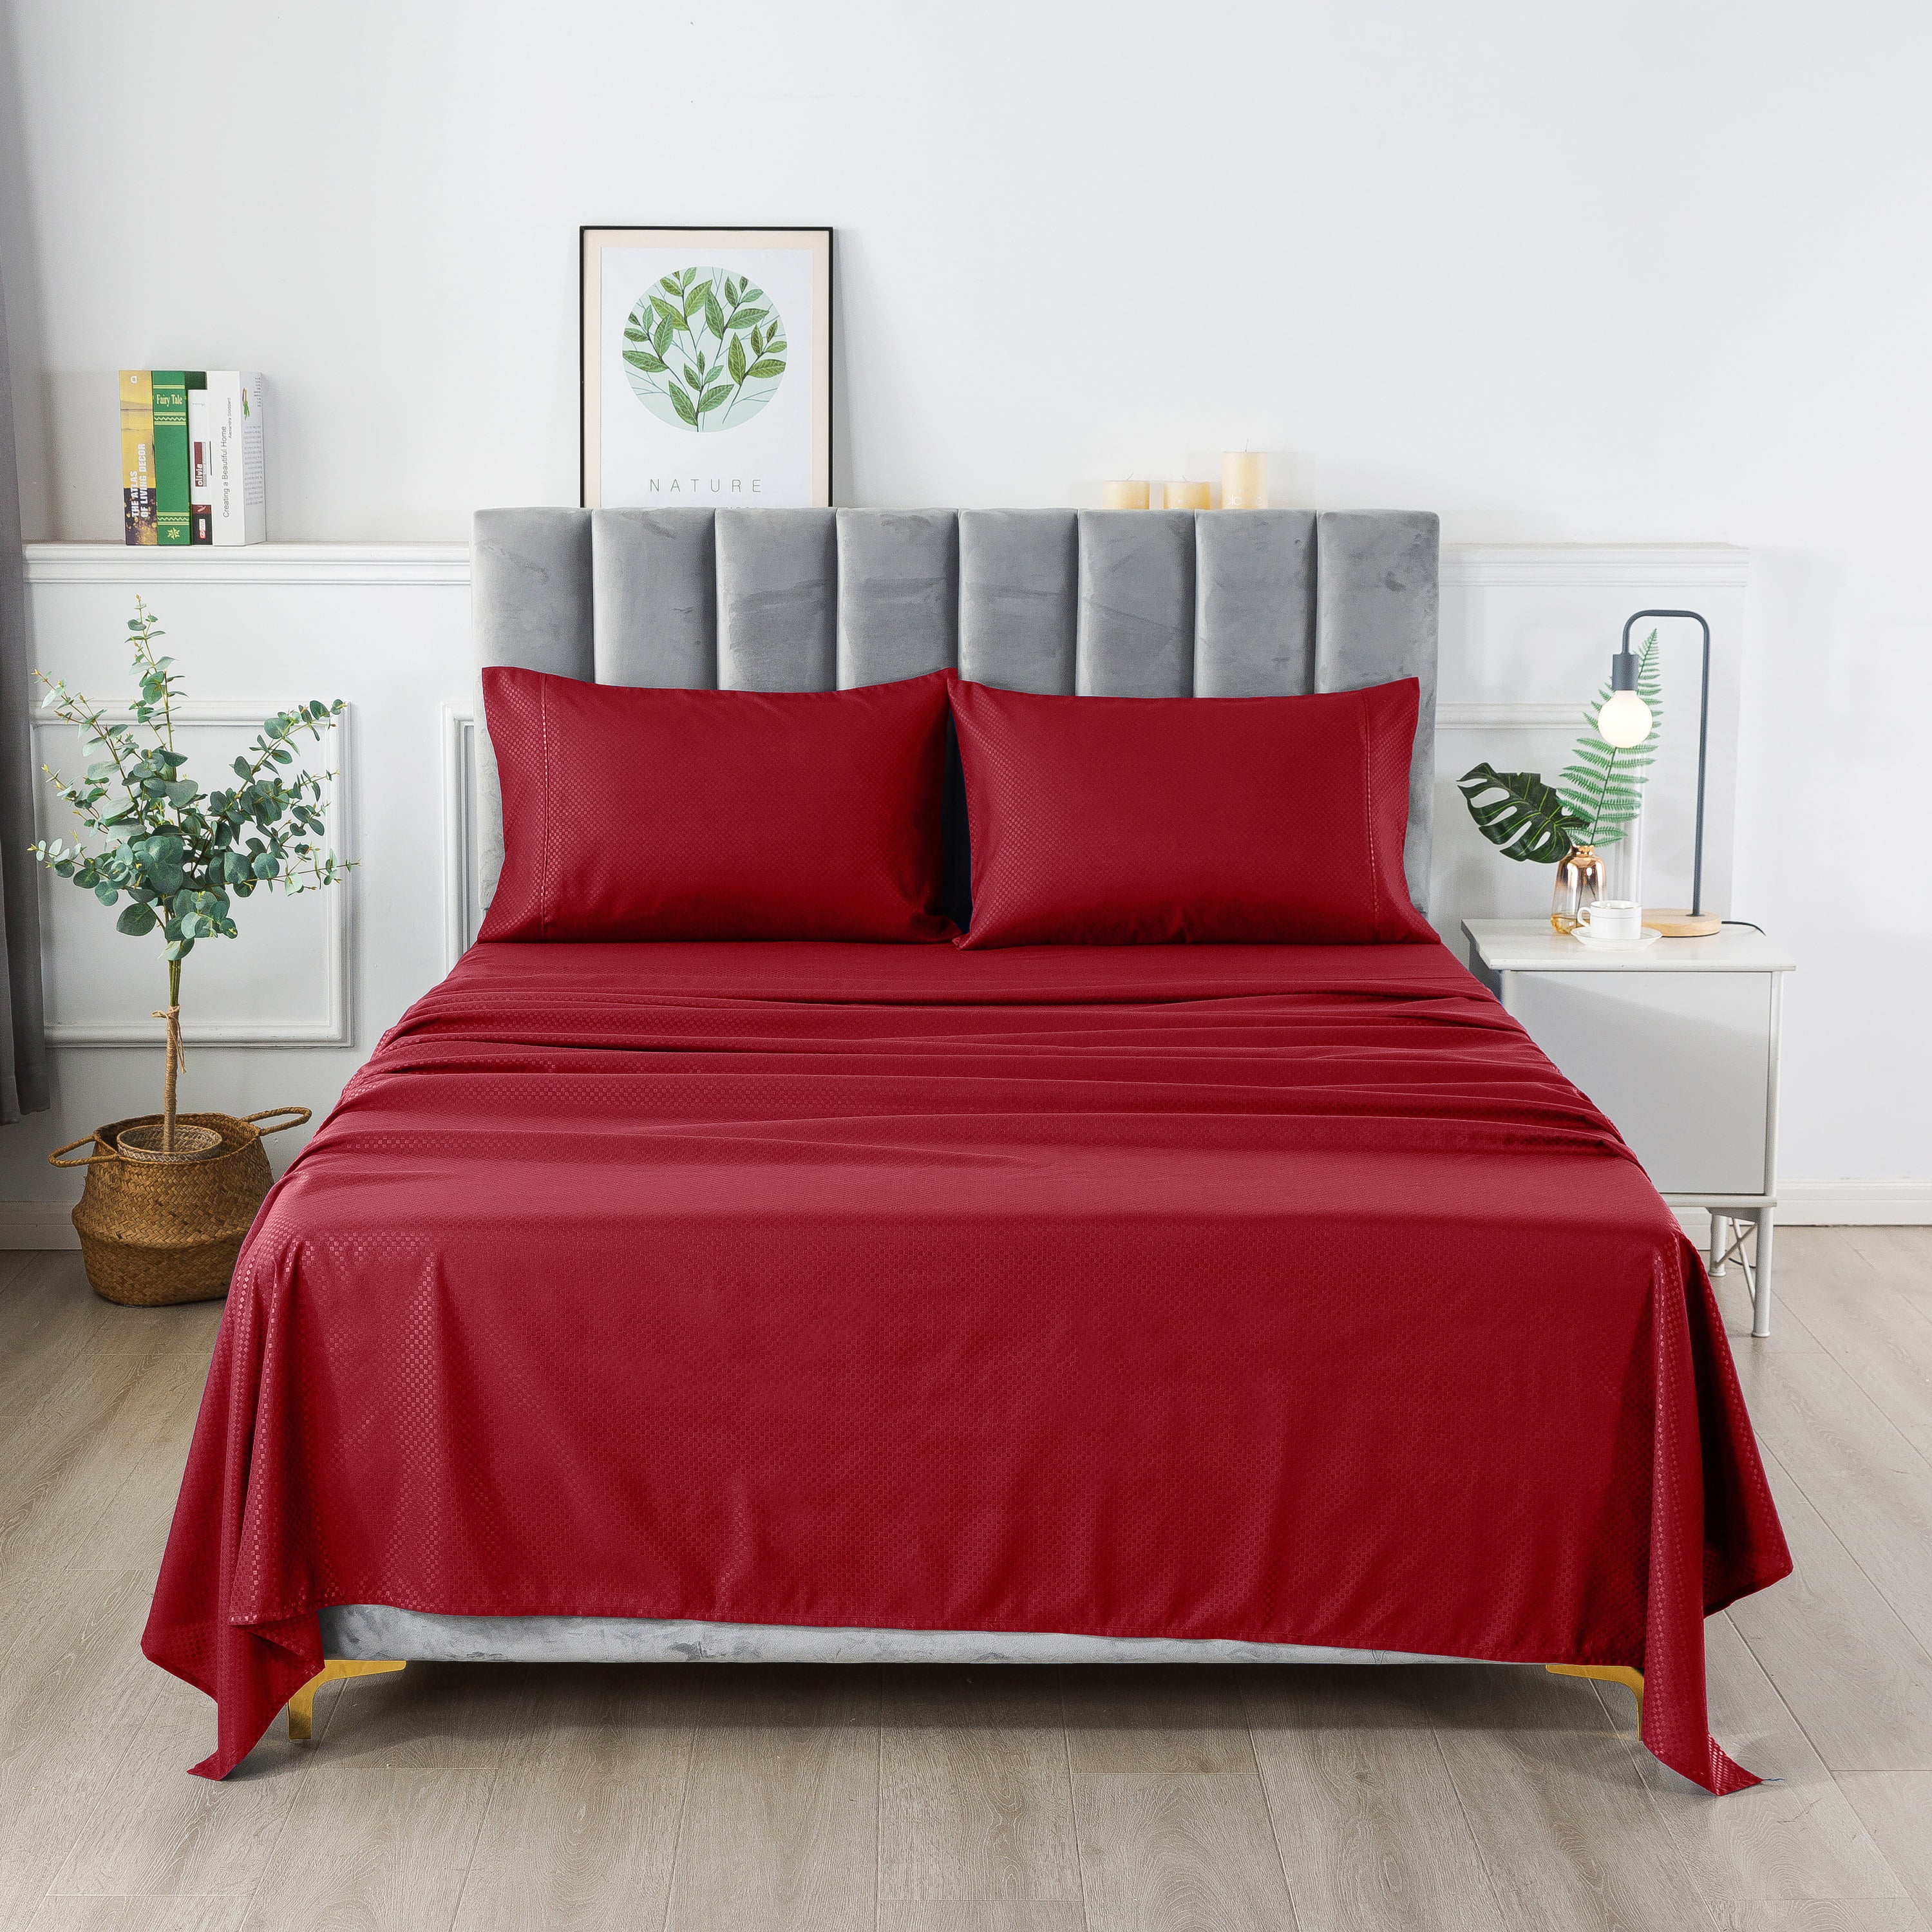 Hotel Collection Platinum Hotel Quality Embossed Queen Sheet Set w/ 4 Pillow Cases Burgundy Red 